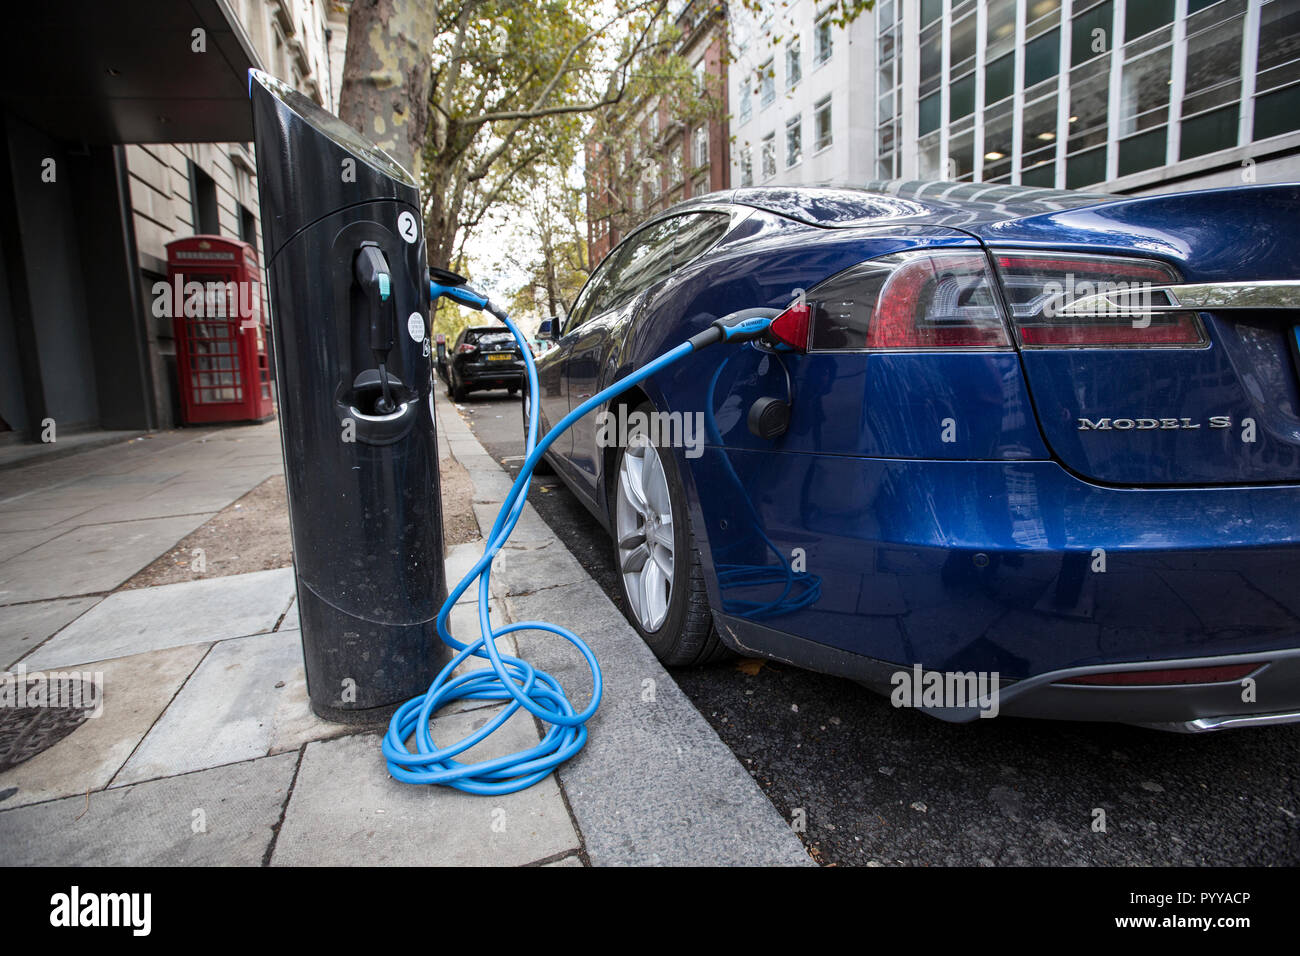 Tesla Model S electric car charging on the street in central London, England, UK Stock Photo